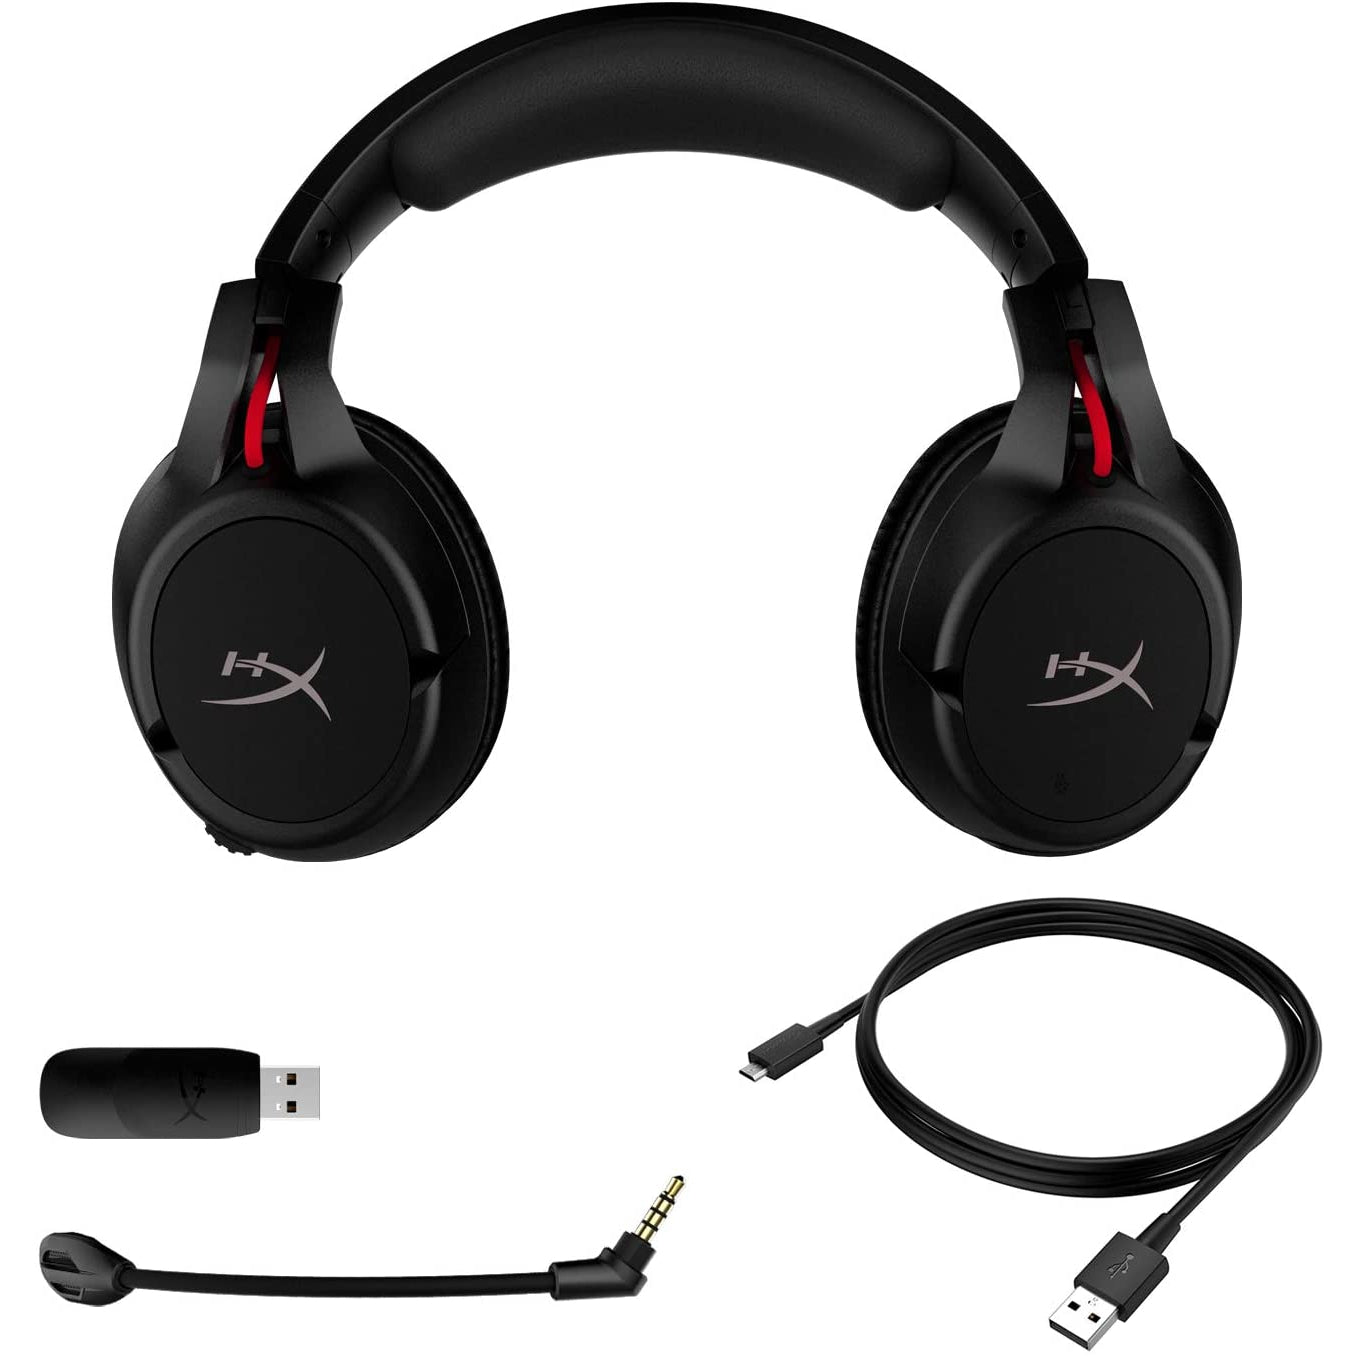 HyperX Cloud Flight - Wireless Gaming Headset For PS4, PC, PS4 Pro - Black